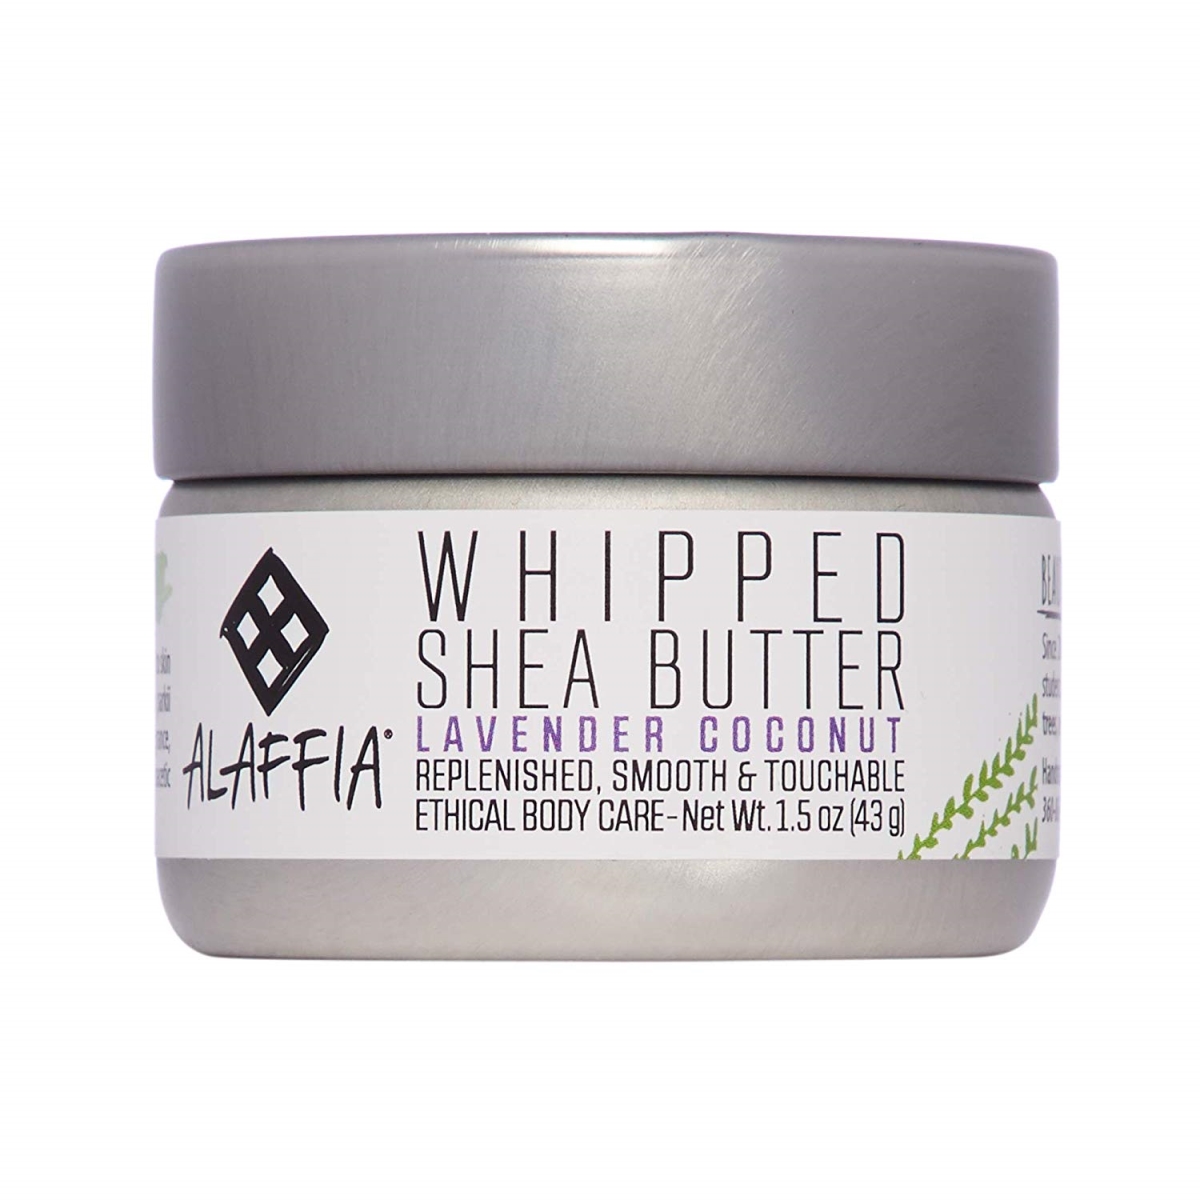 Picture of Alaffia 237688 1.5 oz Whipped Shea Butter Lavender &amp; Coconut Cream